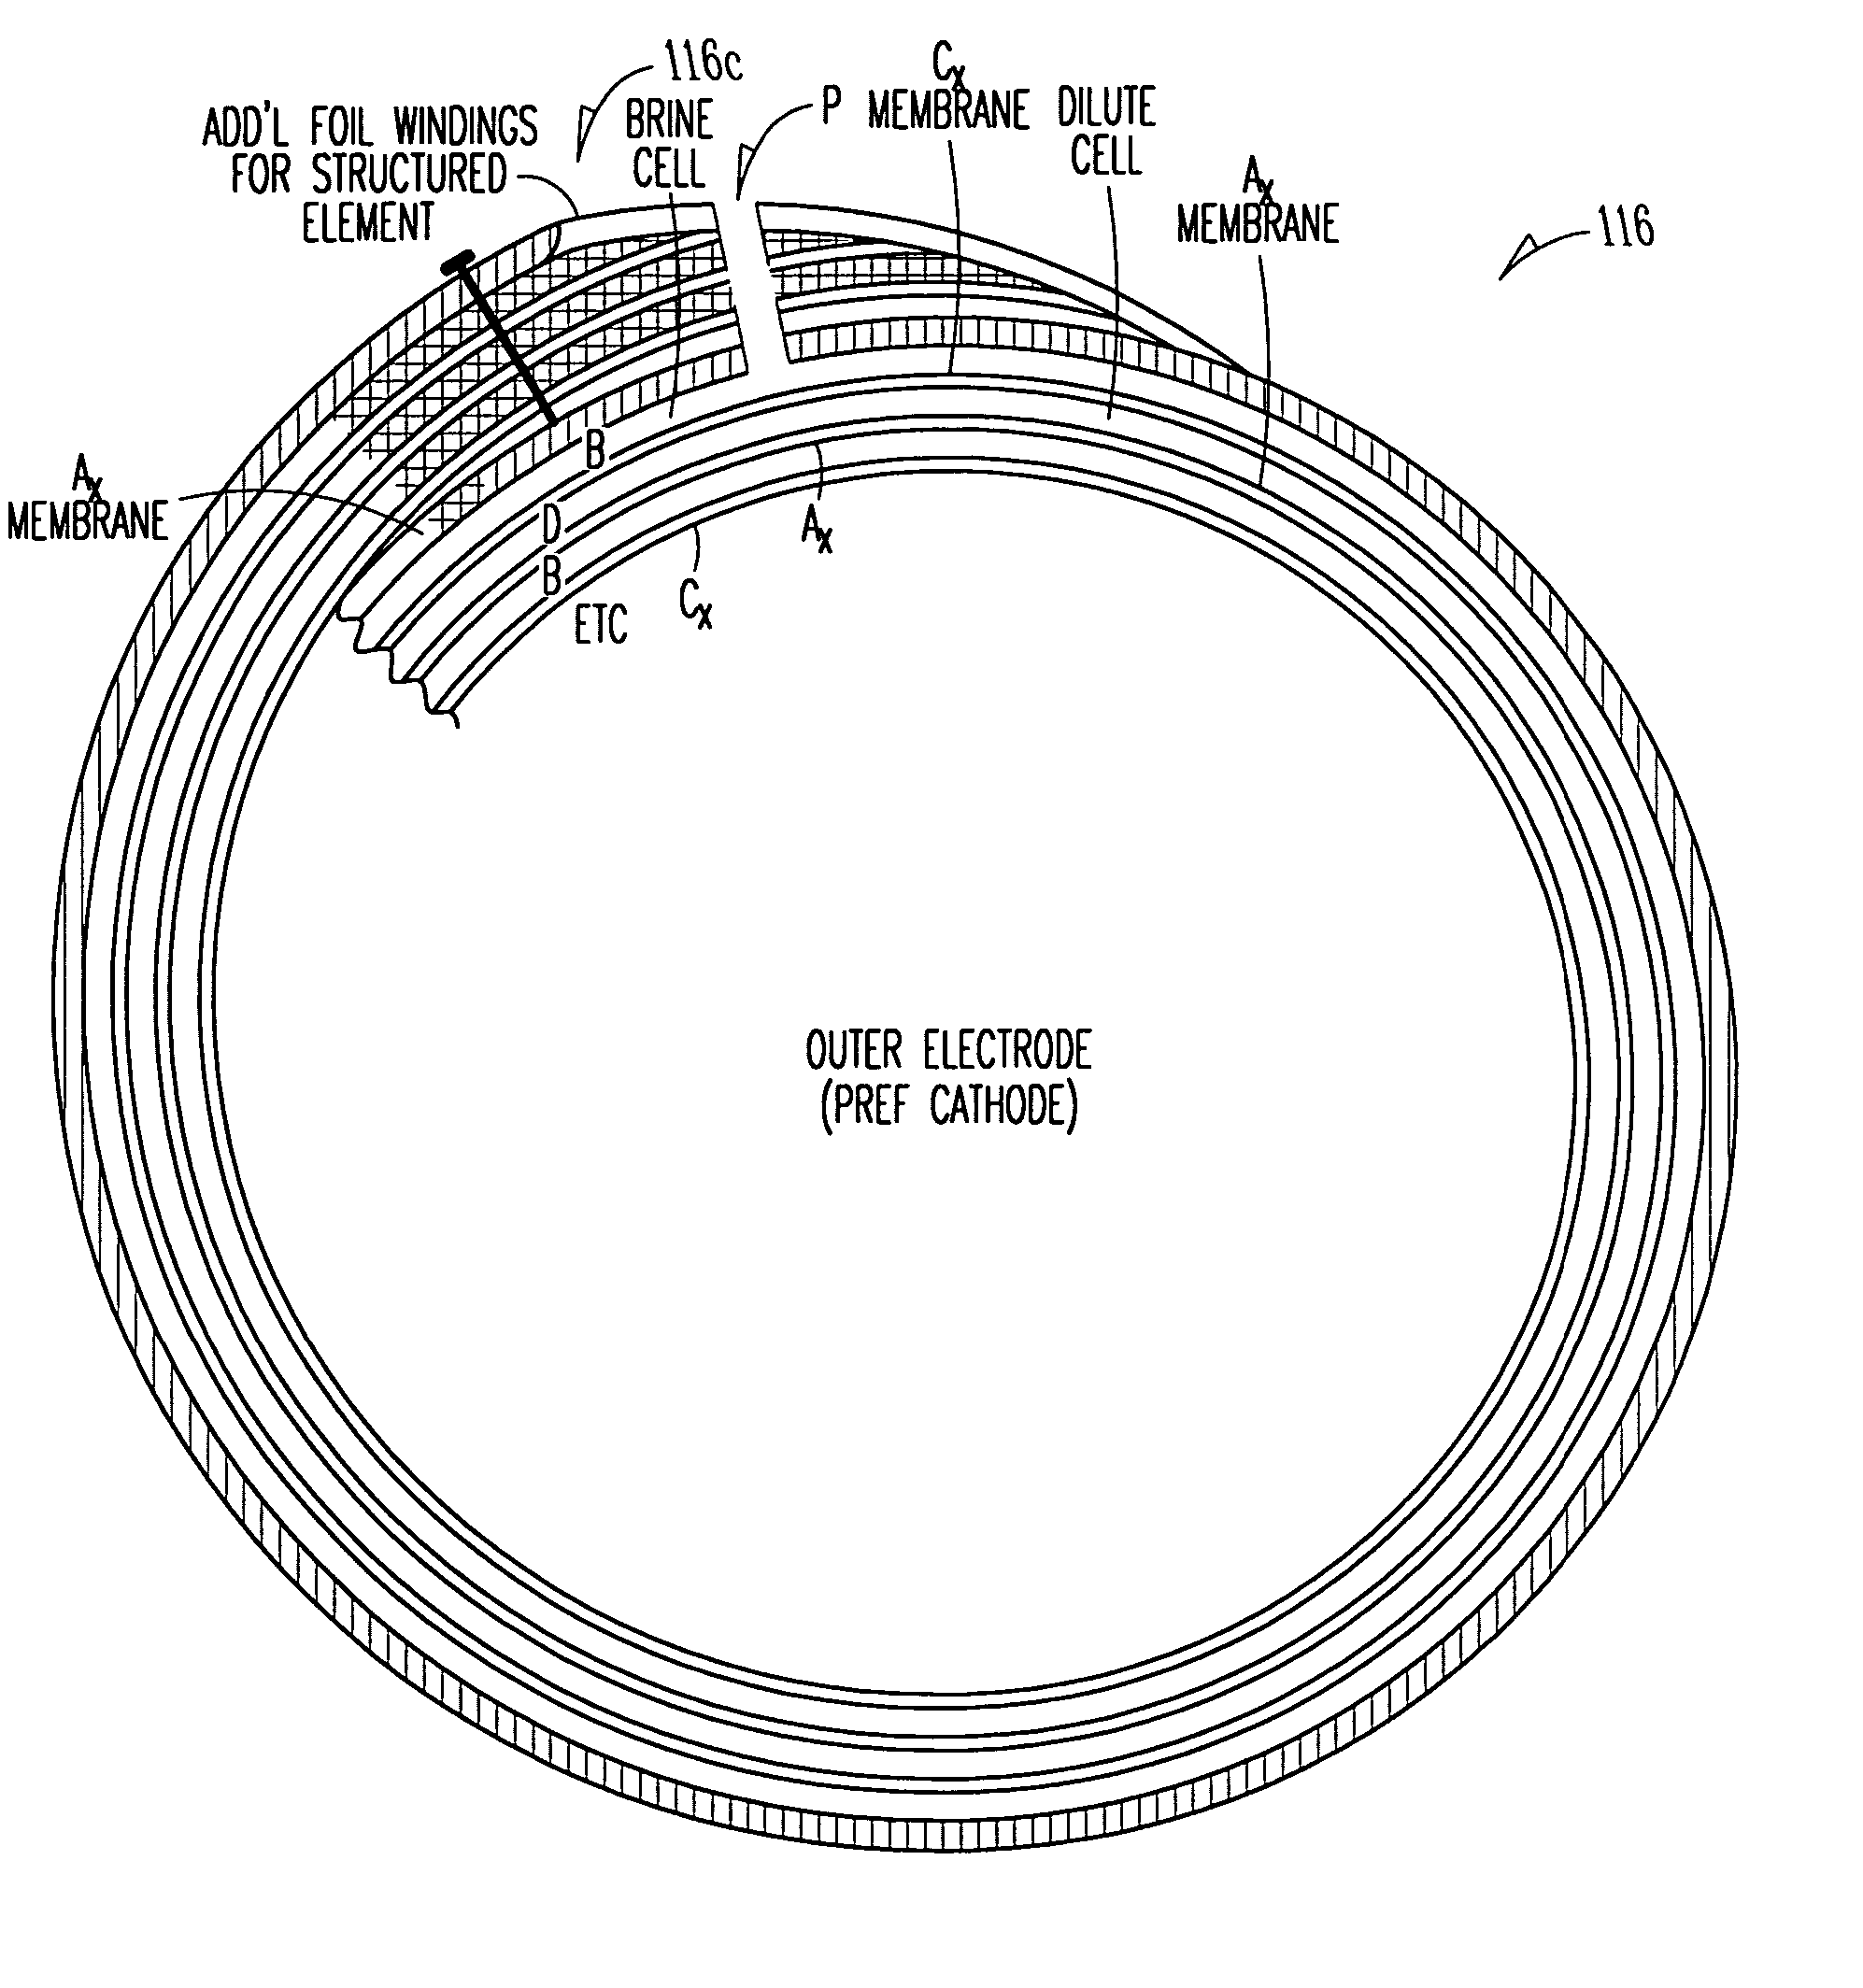 Spiral electrodeionization device with uniform operating characteristics